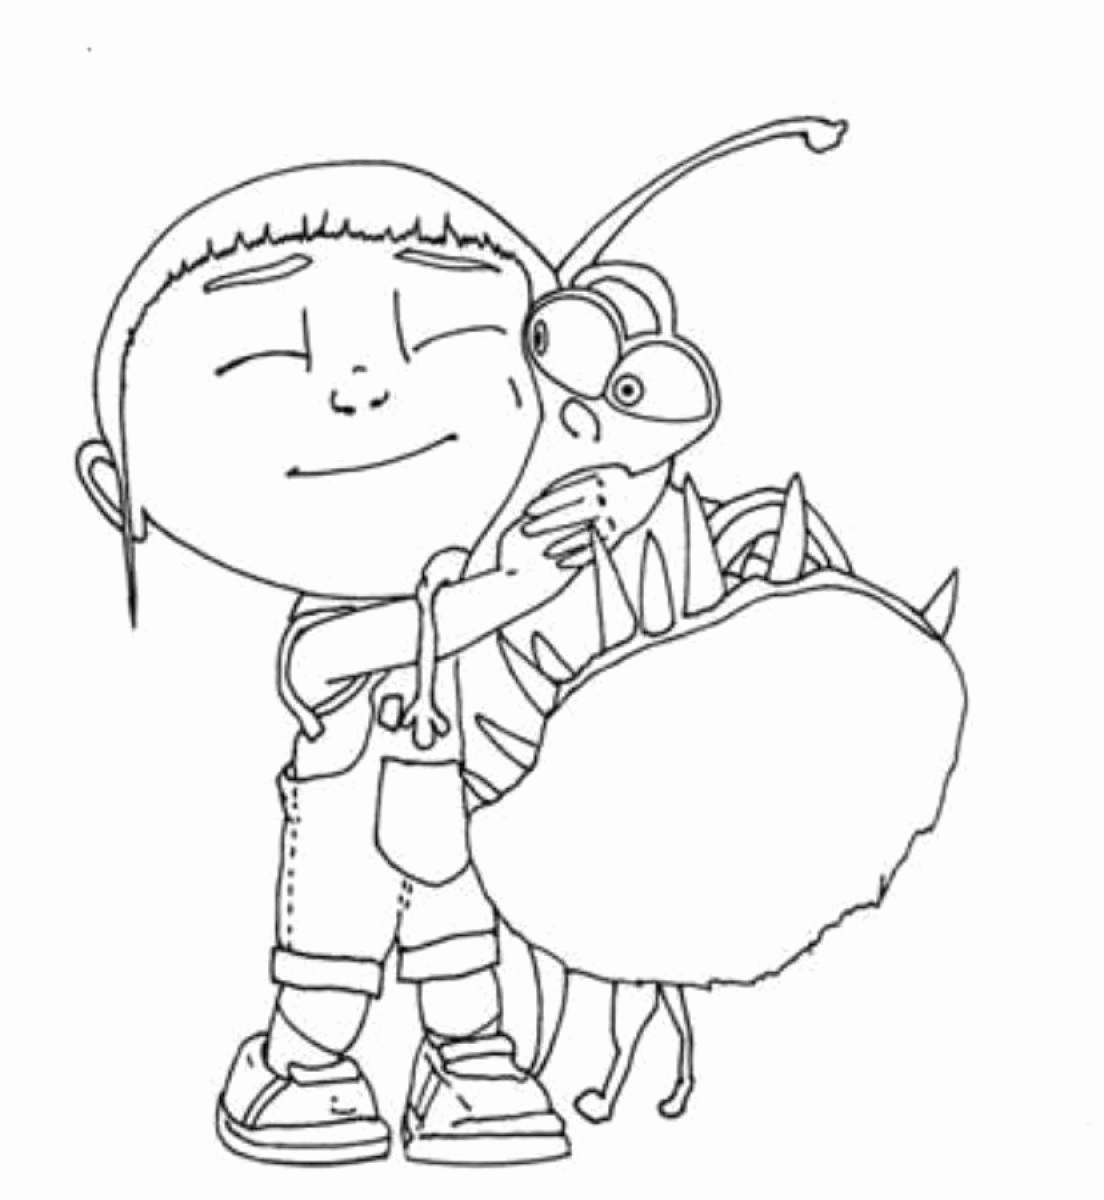 Despicable Me Agnes Coloring Pages at GetColorings.com ...